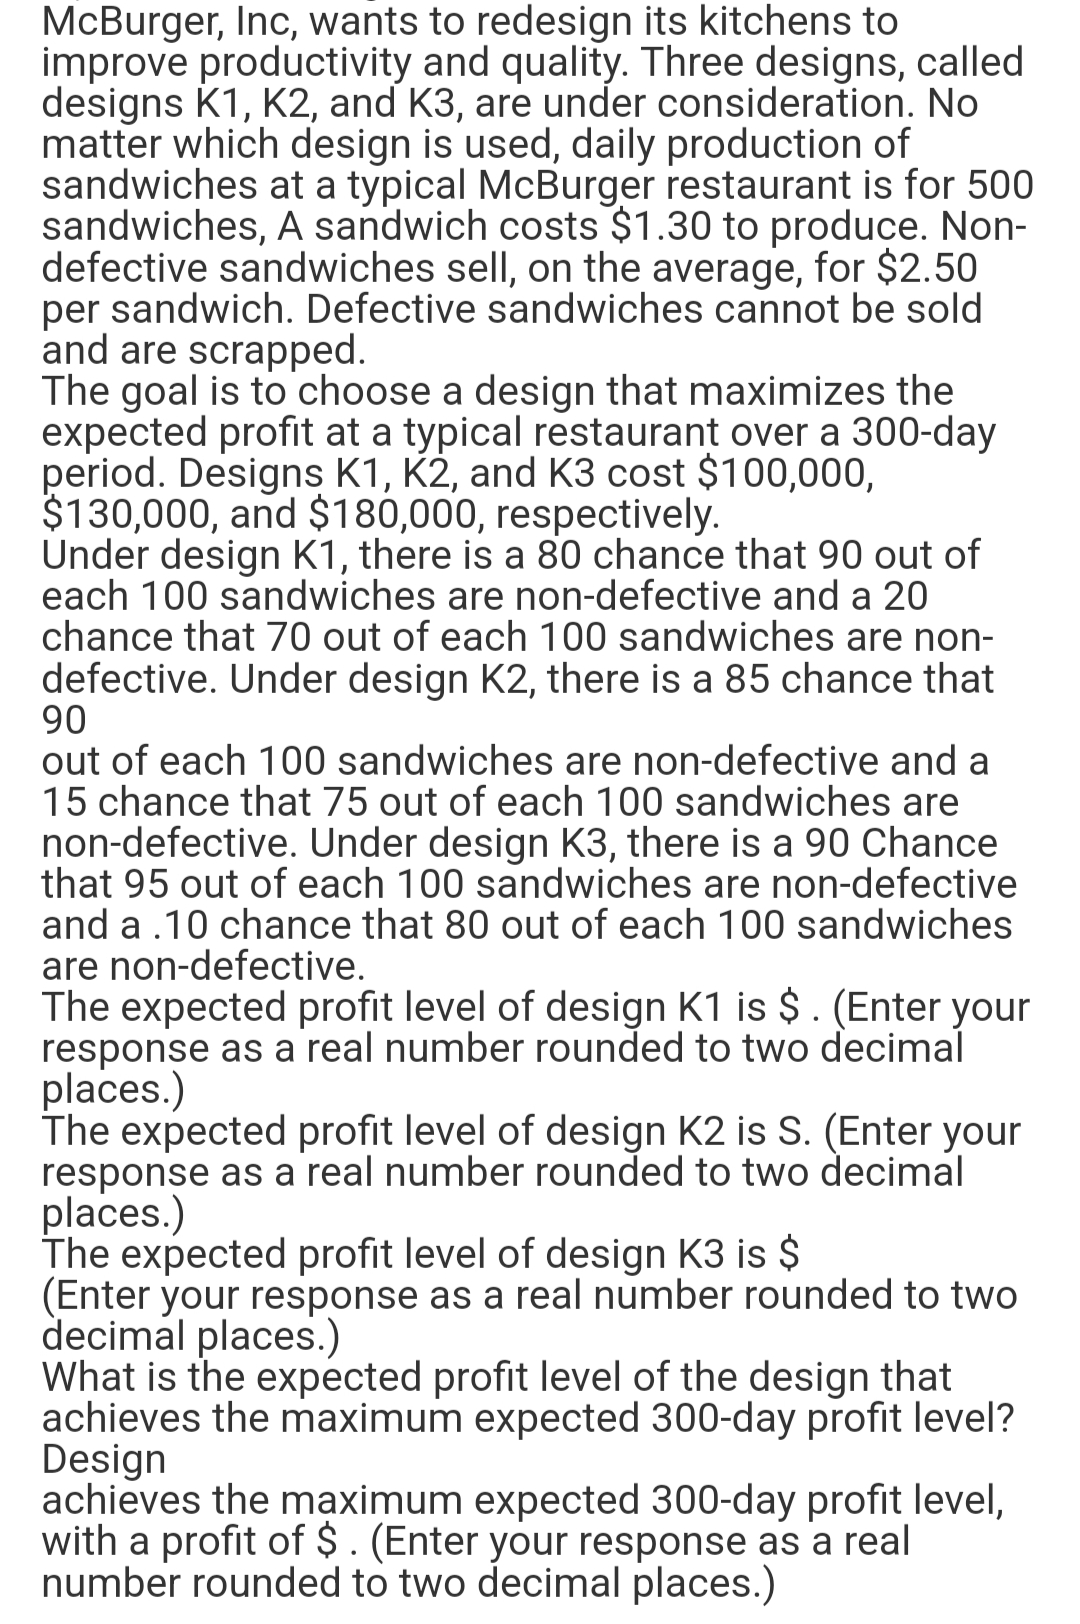 McBurger, Inc, wants to redesign its kitchens to
improve productivity and quality. Three designs, called
designs K1, K2, and K3, are under consideration. No
matter which design is used, daily production of
sandwiches at a typical McBurger restaurant is for 500
sandwiches, A sandwich costs $1.30 to produce. Non-
defective sandwiches sell, on the average, for $2.50
per sandwich. Defective sandwiches cannot be sold
and are scrapped.
The goal is to choose a design that maximizes the
expected profit at a typical restaurant over a 300-day
period. Designs K1, K2, and K3 cost $100,000,
$130,000, and $180,000, respectively.
Under design K1, there is a 80 chance that 90 out of
each 100 sandwiches are non-defective and a 20
chance that 70 out of each 100 sandwiches are non-
defective. Under design K2, there is a 85 chance that
90
out of each 100 sandwiches are non-defective and a
15 chance that 75 out of each 100 sandwiches are
non-defective. Under design K3, there is a 90 Chance
that 95 out of each 100 sandwiches are non-defective
and a .10 chance that 80 out of each 100 sandwiches
are non-defective.
The expected profit level of design K1 is $. (Enter your
response as a real number rounded to two decimal
places.)
The expected profit level of design K2 is S. (Enter your
response as a real number rounded to two decimal
places.)
The expected profit level of design K3 is $
(Enter your response as a real number rounded to two
decimal places.)
What is the expected profit level of the design that
achieves the maximum expected 300-day profit level?
Design
achieves the maximum expected 300-day profit level,
with a profit of $. (Enter your response as a real
number rounded to two decimal places.)